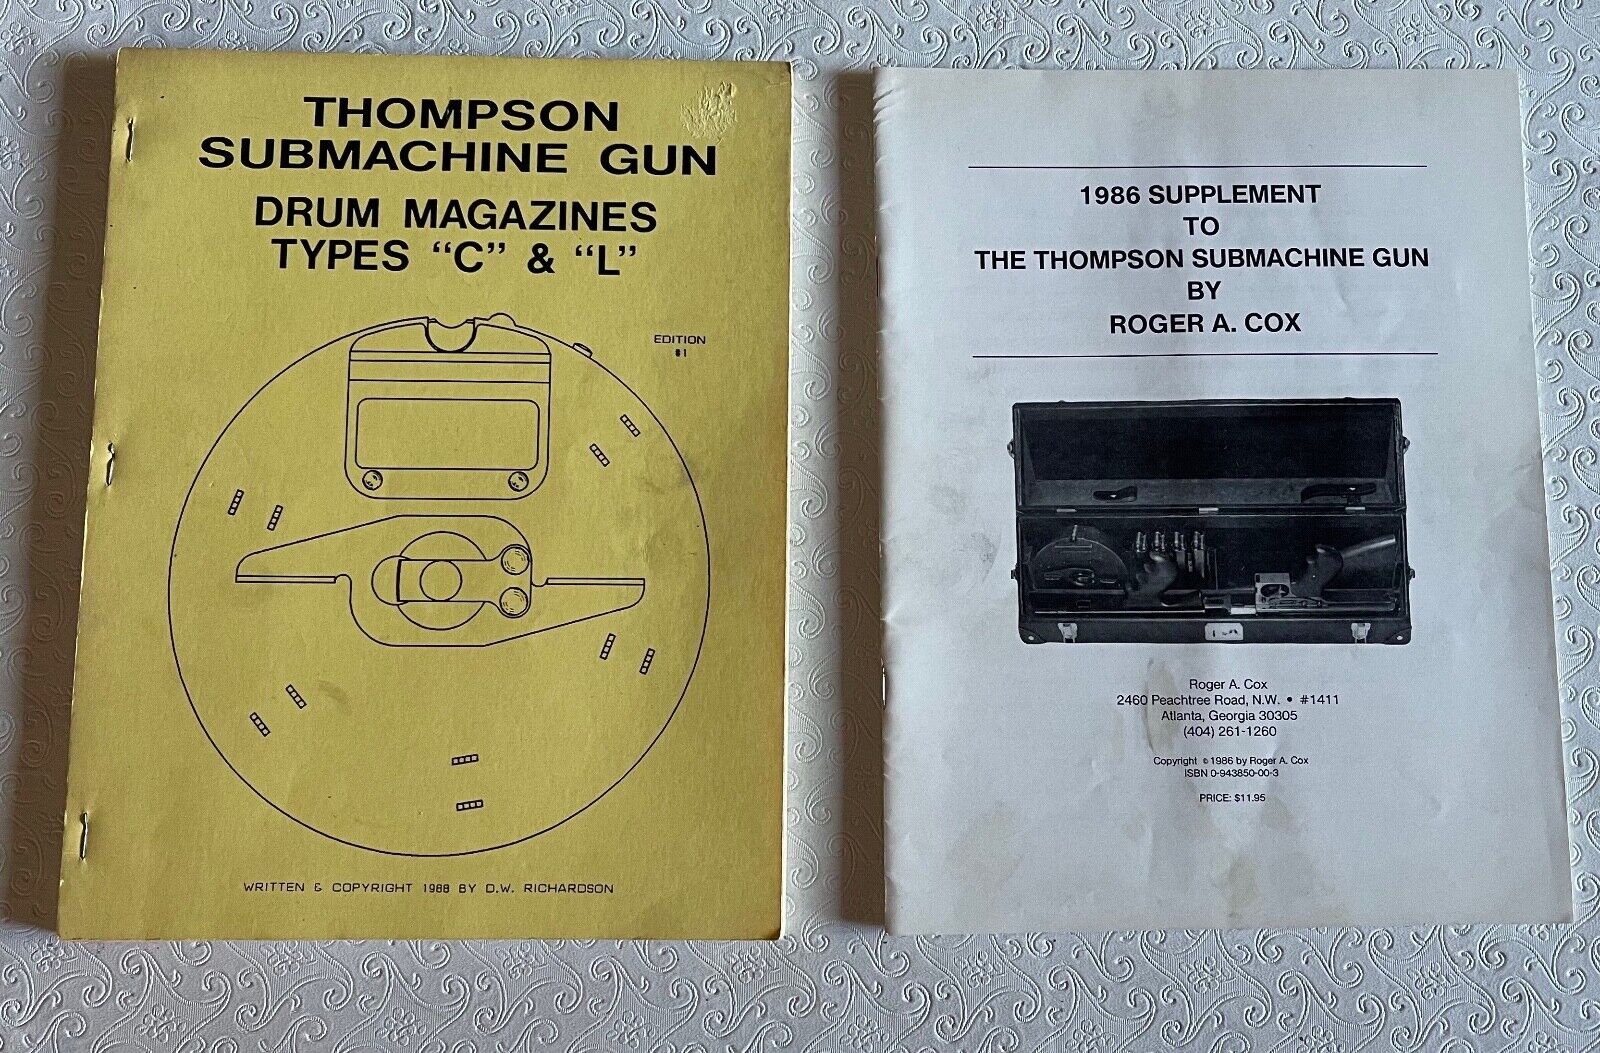 2 Reference Books on Thompson Submachine Gun - Drum Mags and Cox Book Supplement